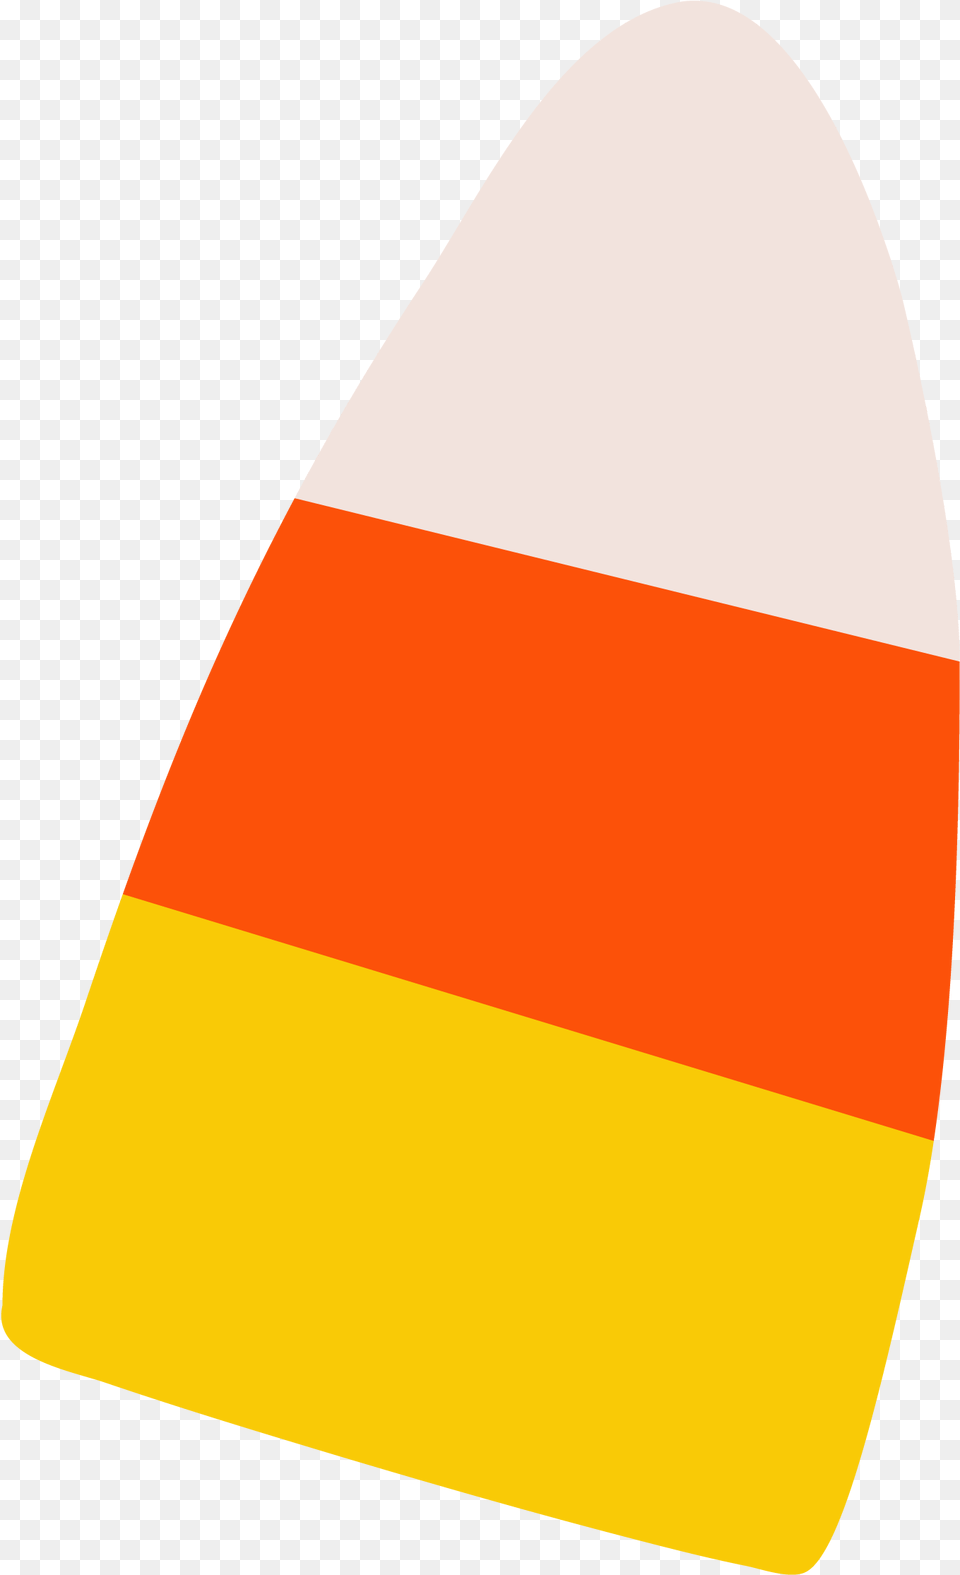 Candy Corn Svg Cut File Vertical, Food, Sweets Png Image